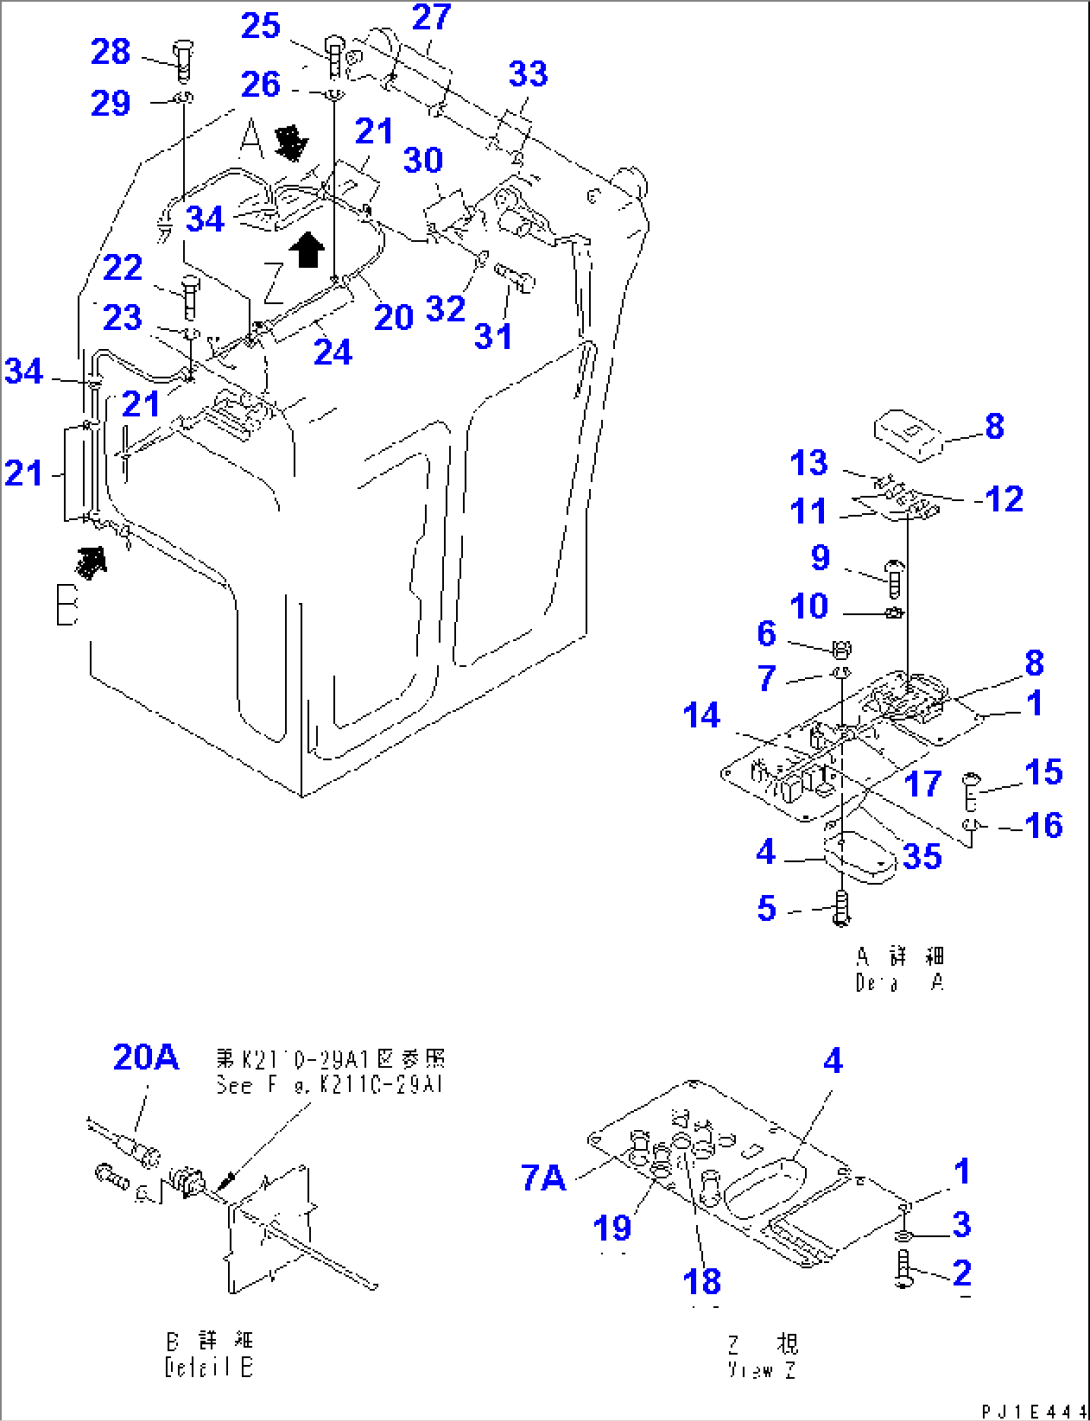 CAB (ELECTRICAL PARTS) (WITH COMBUSTIBLE HEATER) (SAFETY REGULATION FOR C.I.S.)(#37594-37832)